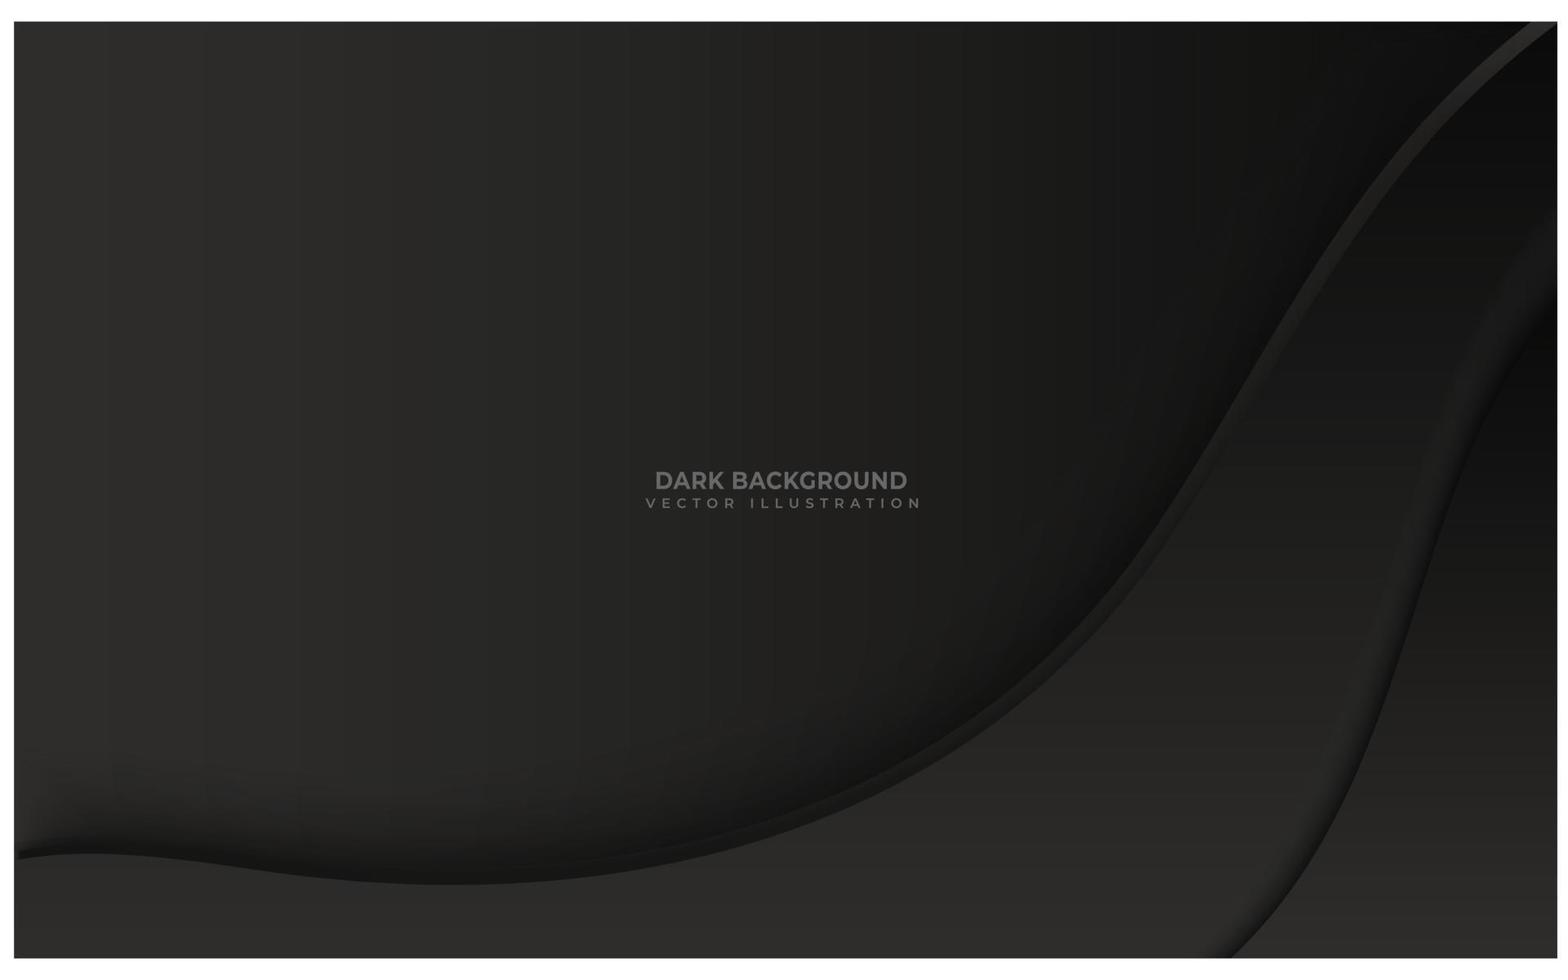 New Dark abstract background with wavy shapes vector